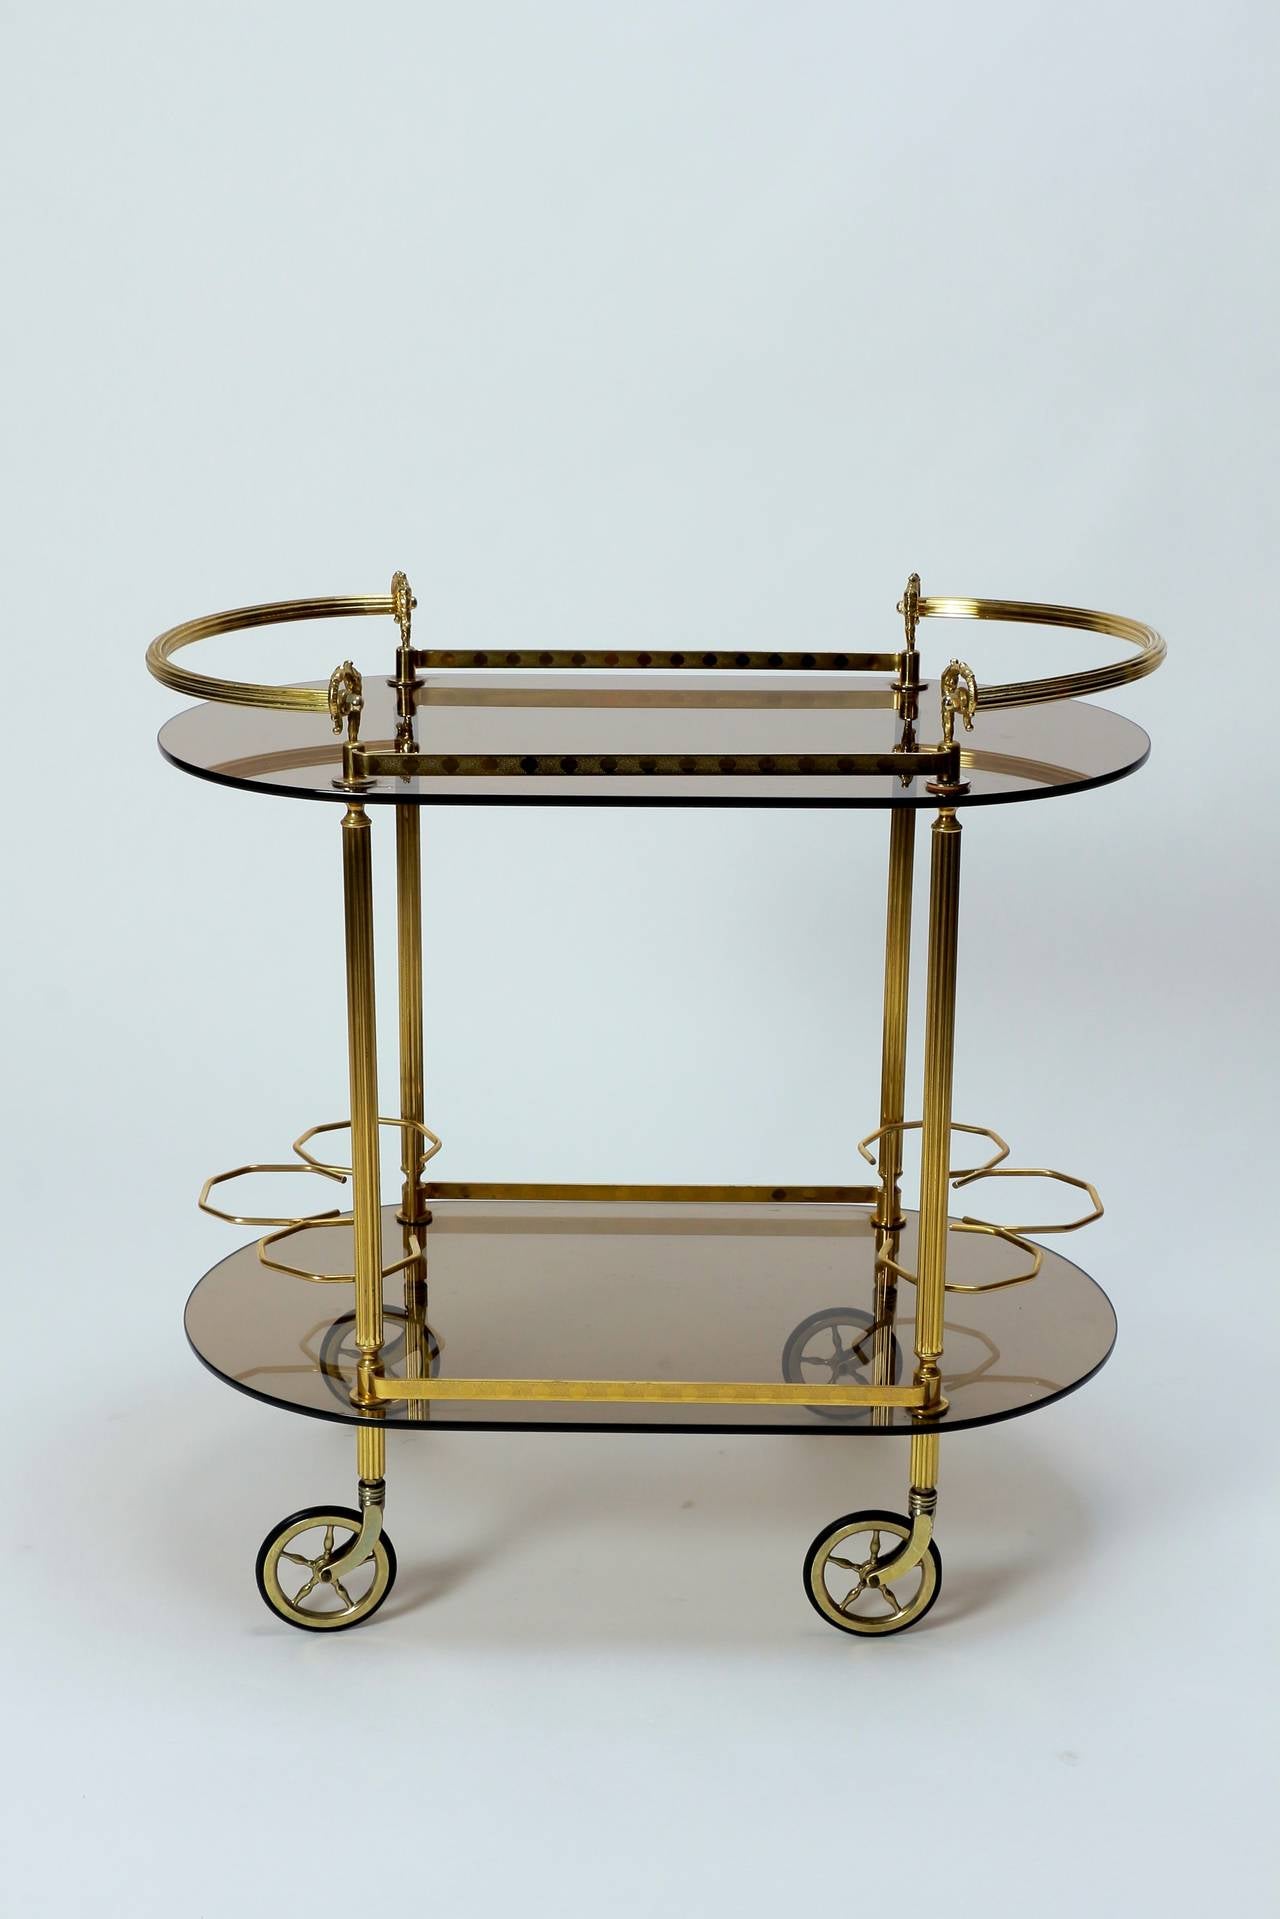 Elegant bar cart, made in France in the 1970's. High quality craftsmanship, solid brass and thick smoked crystal glass shelves. 6 bottle holders on the bottom shelf, the castors roll perfectly smooth! Great condition!